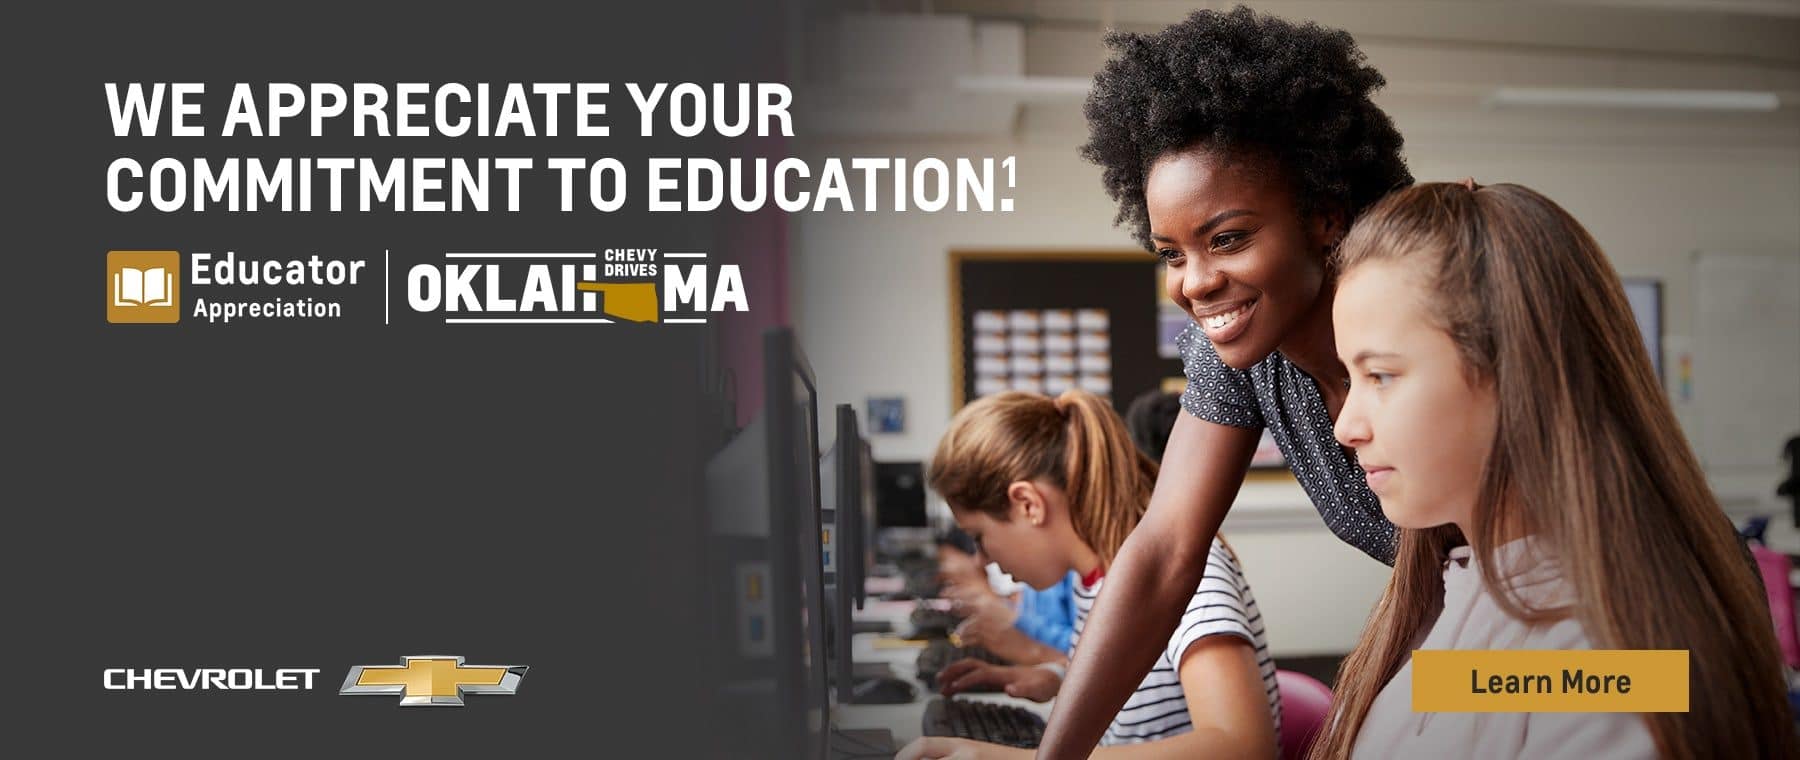 Our appreciation for your education. Educator Discount. Chevy Drives Oklahoma.